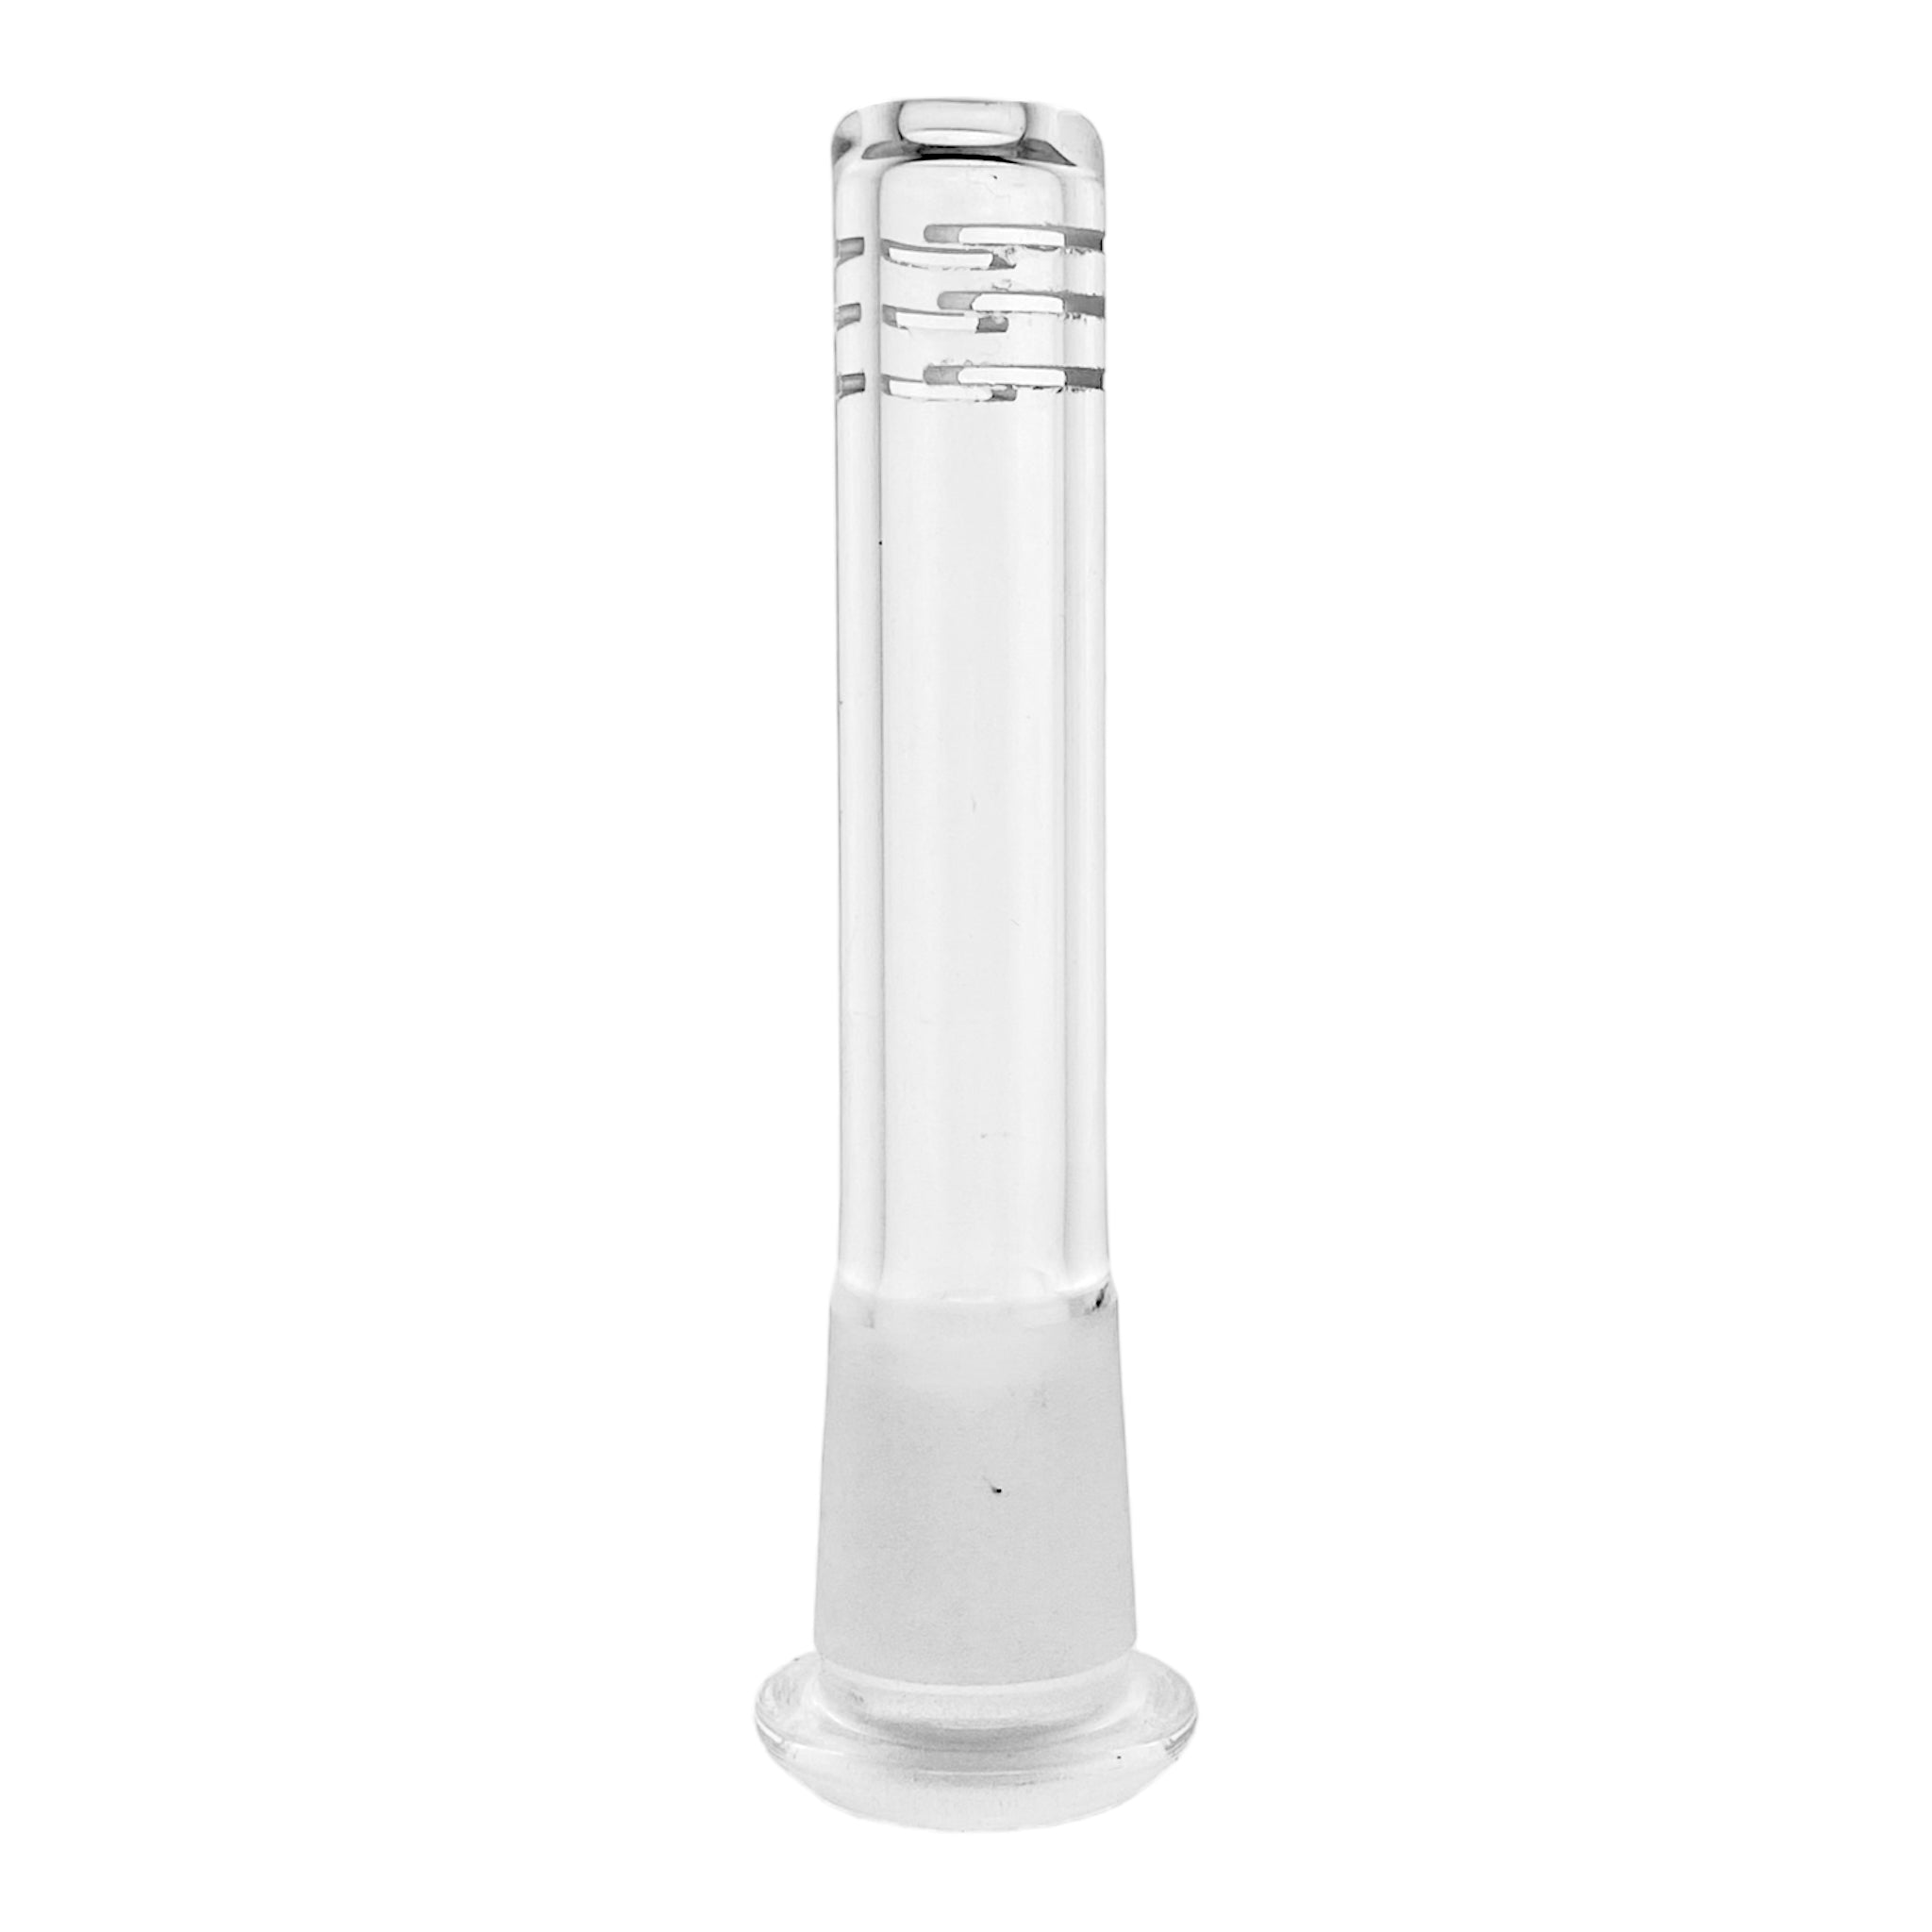 14mm downstem for glass bong for sale online free shipping